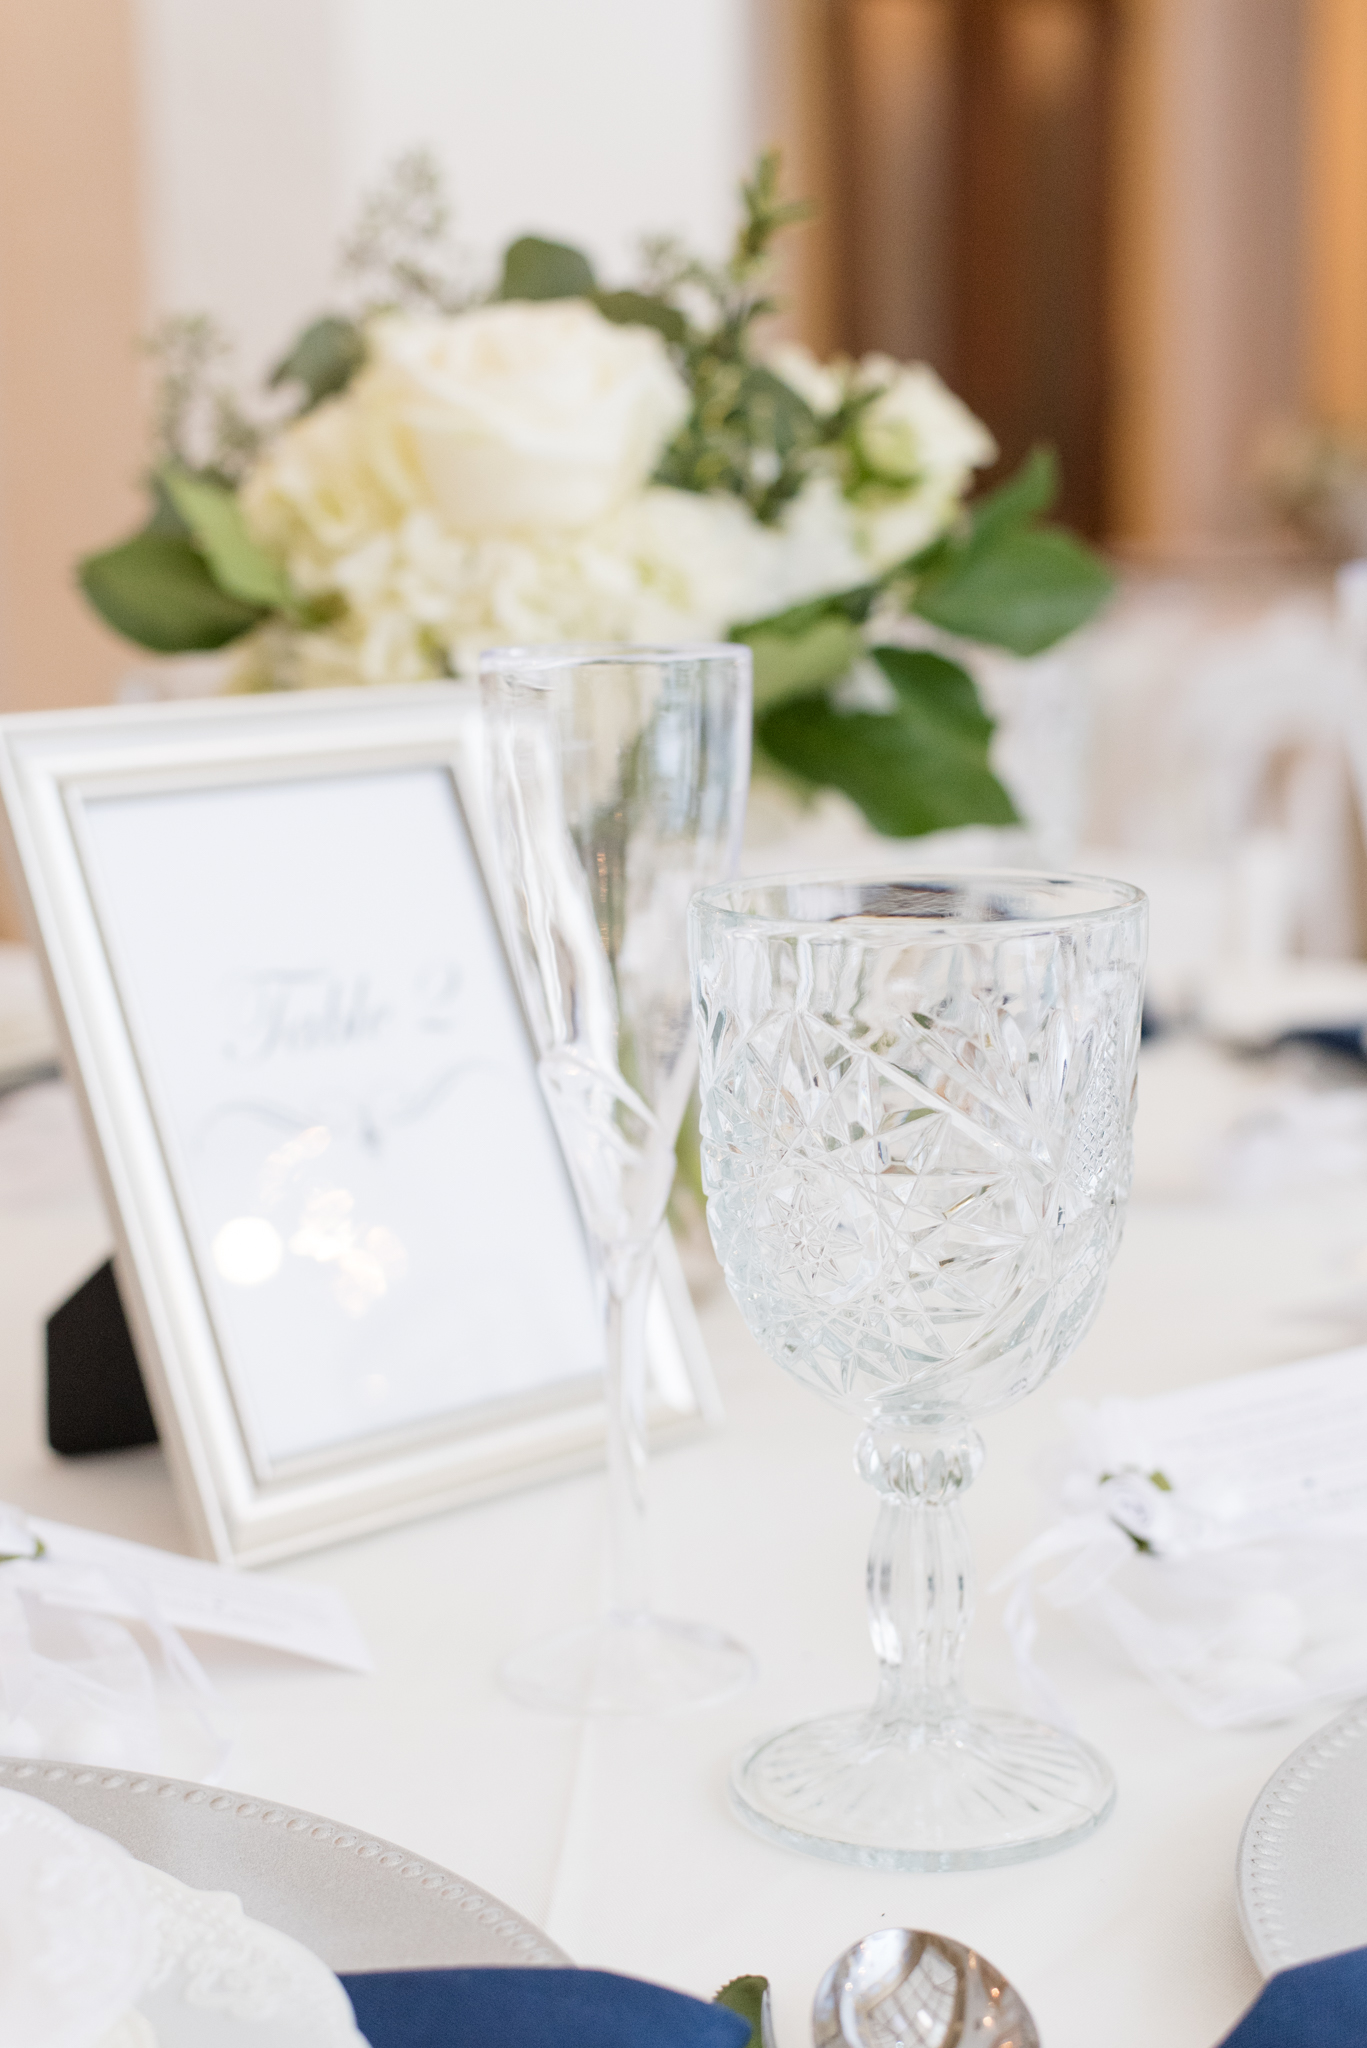 Glasses on wedding reception table.